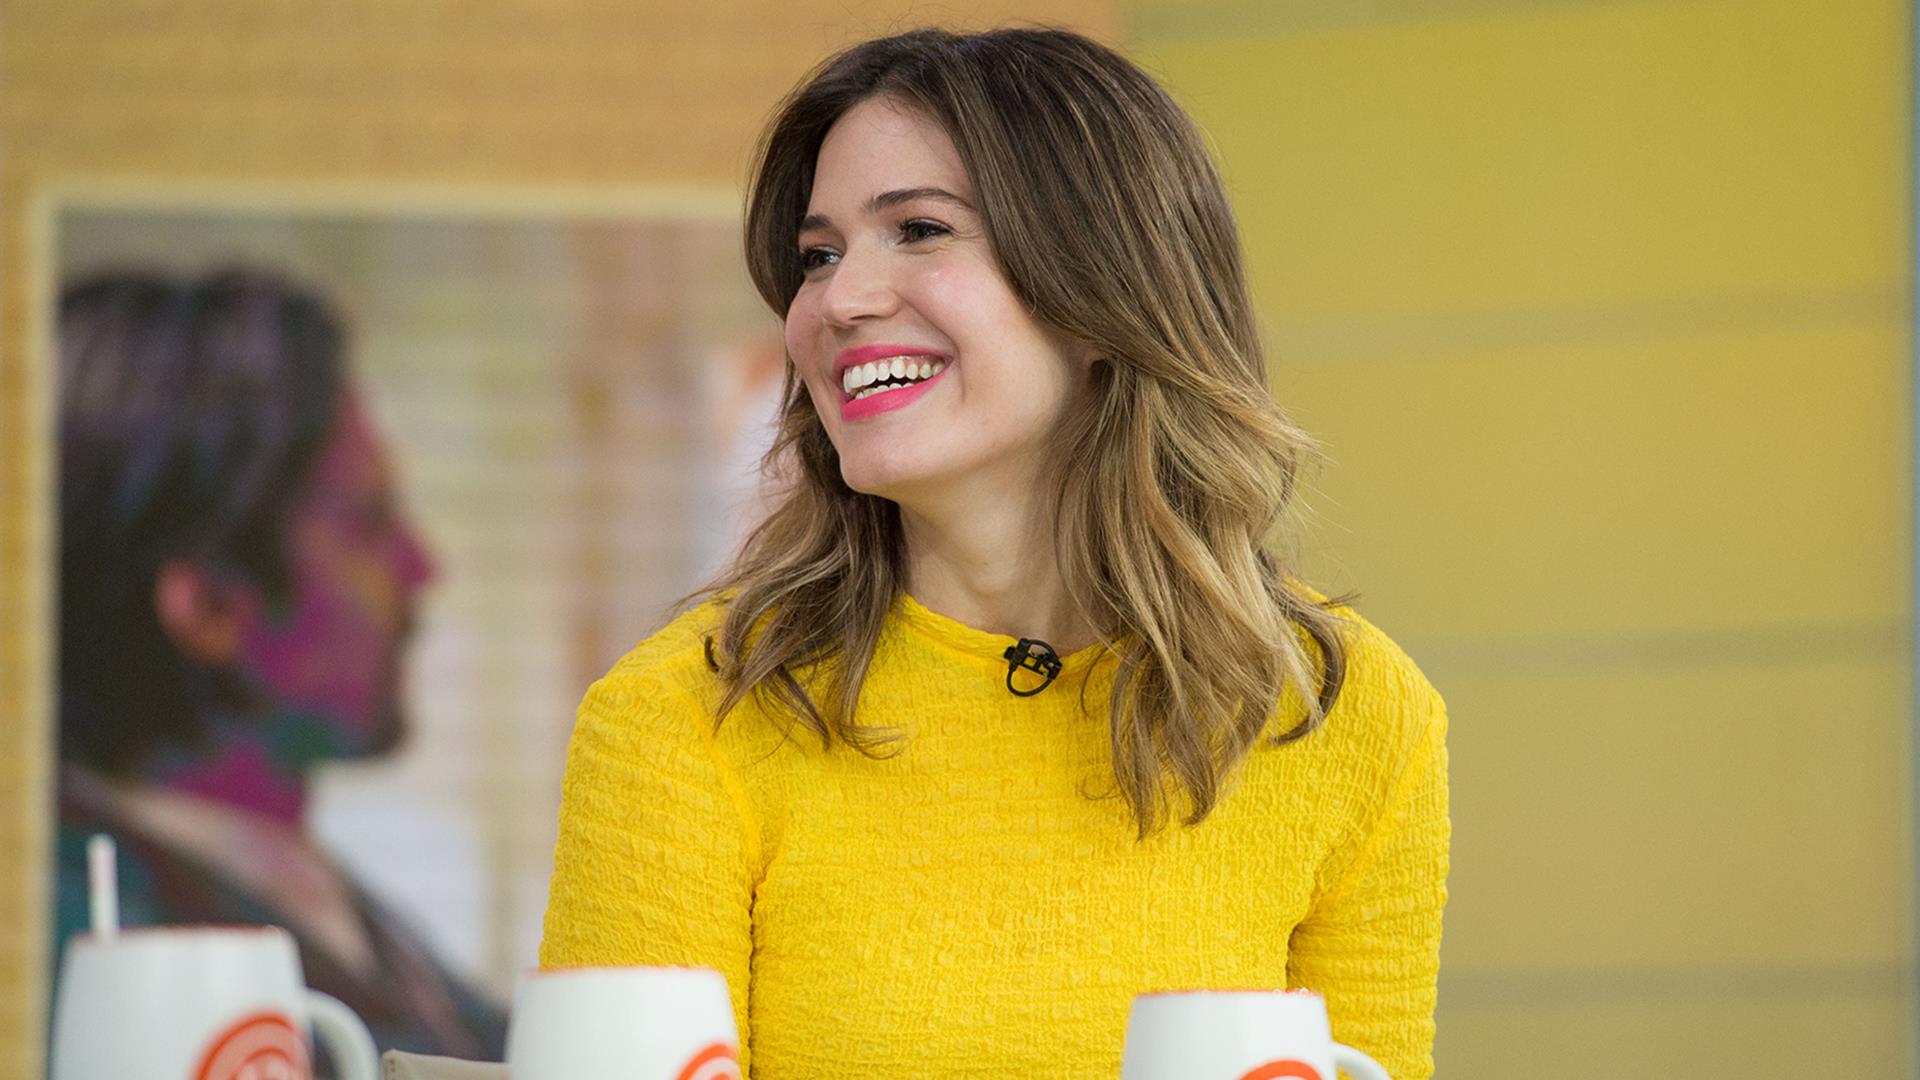 Mandy Moore: My parents text me about my 'This Is Us' character